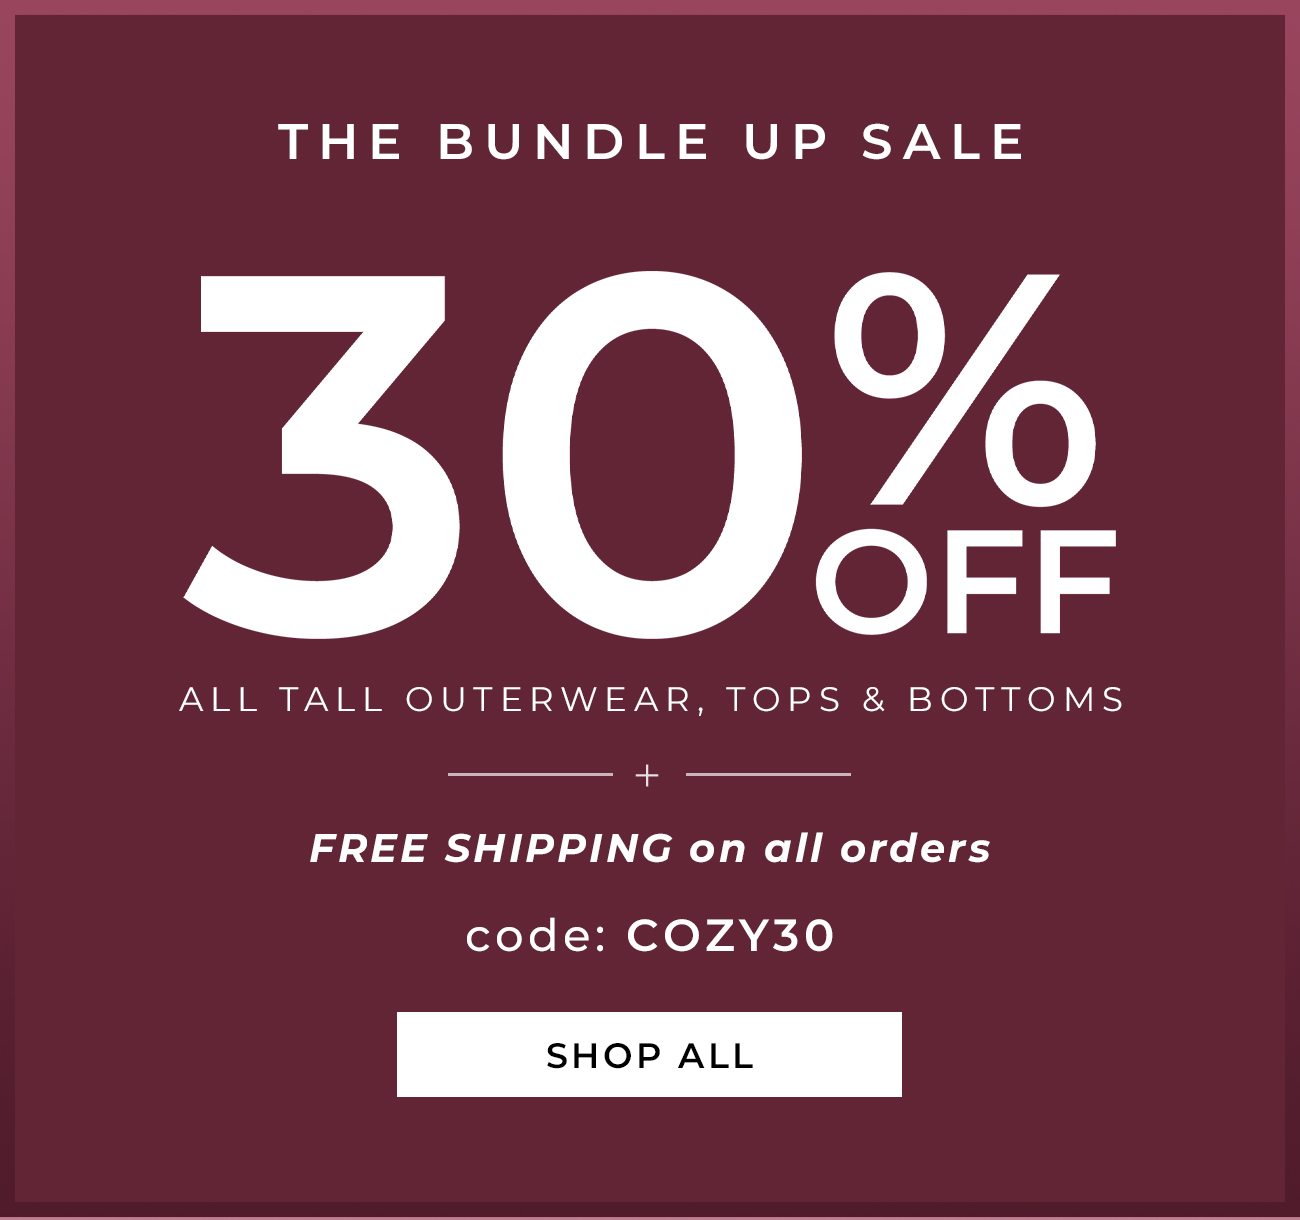 THE BUNDLE UP SALE - 30% Off All Tall Outerwear, Tops & Bottoms + Free Shipping On All Orders CODE: COZY30 